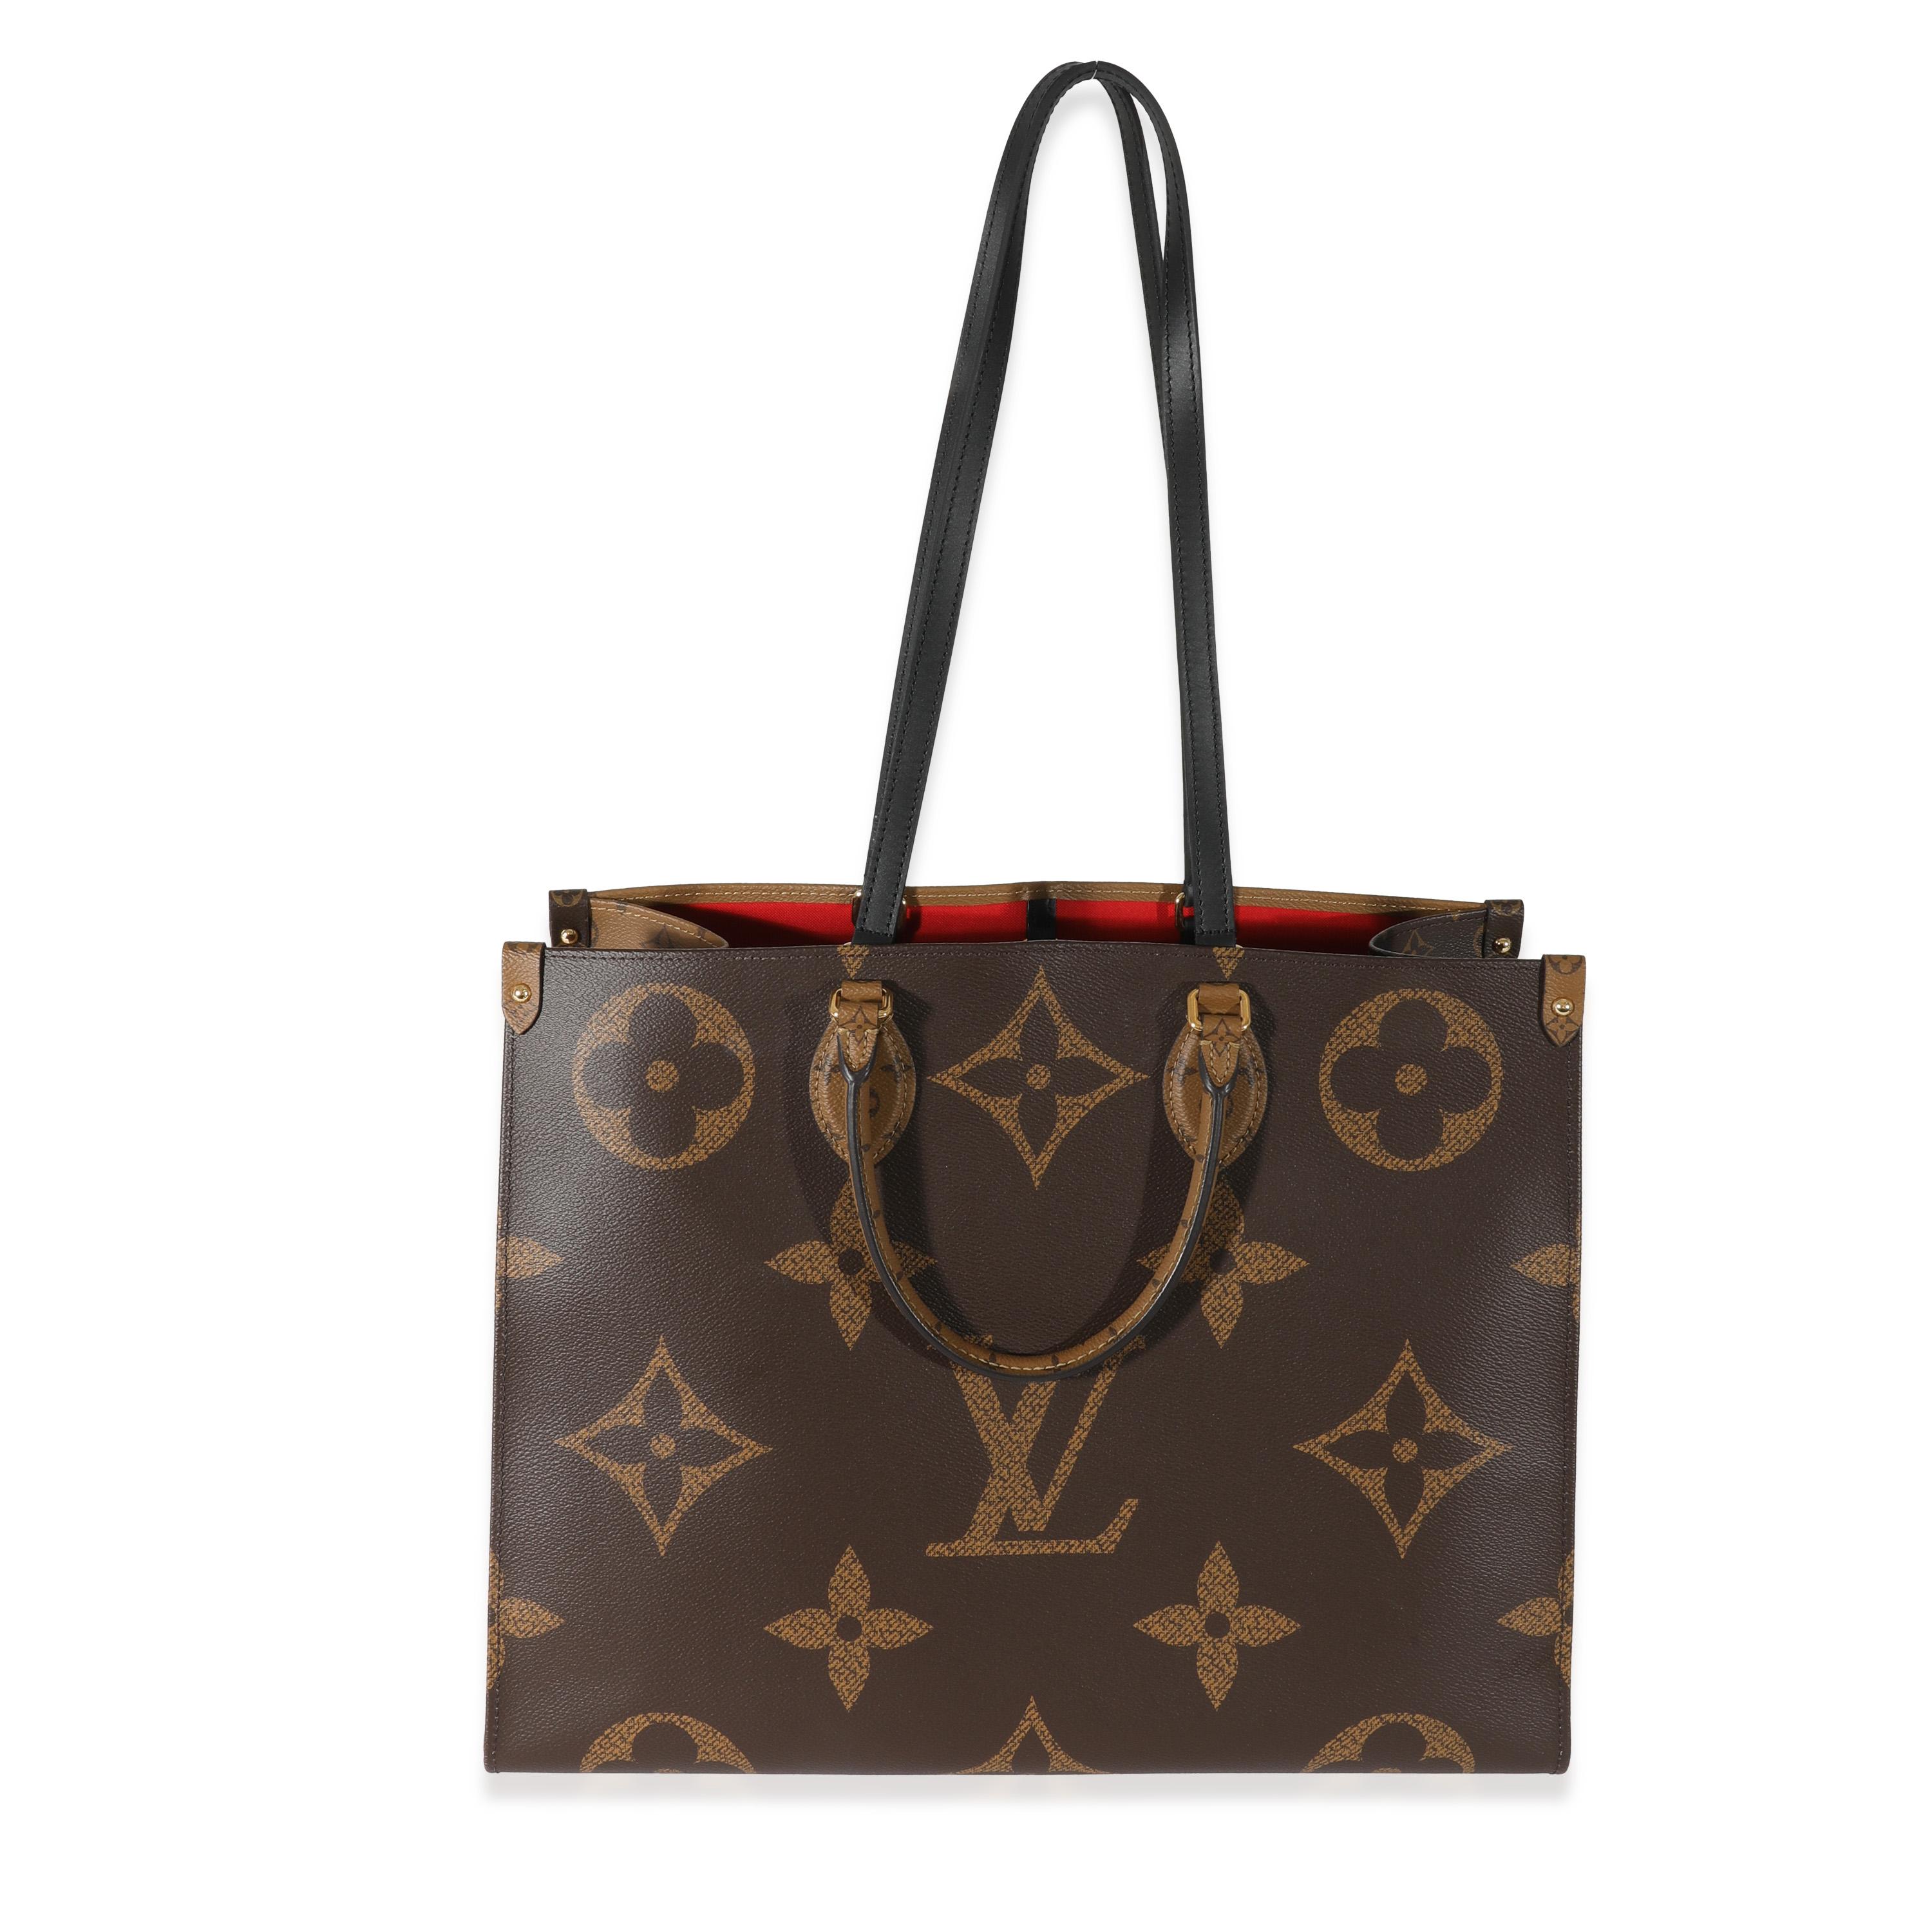 Listing Title: Louis Vuitton Giant Monogram Reverse Onthego GM
SKU: 130489
Condition: Pre-owned 
Handbag Condition: Excellent
Condition Comments: Excellent Condition. Light scuffing to corners. No other visible signs of wear.
Brand: Louis